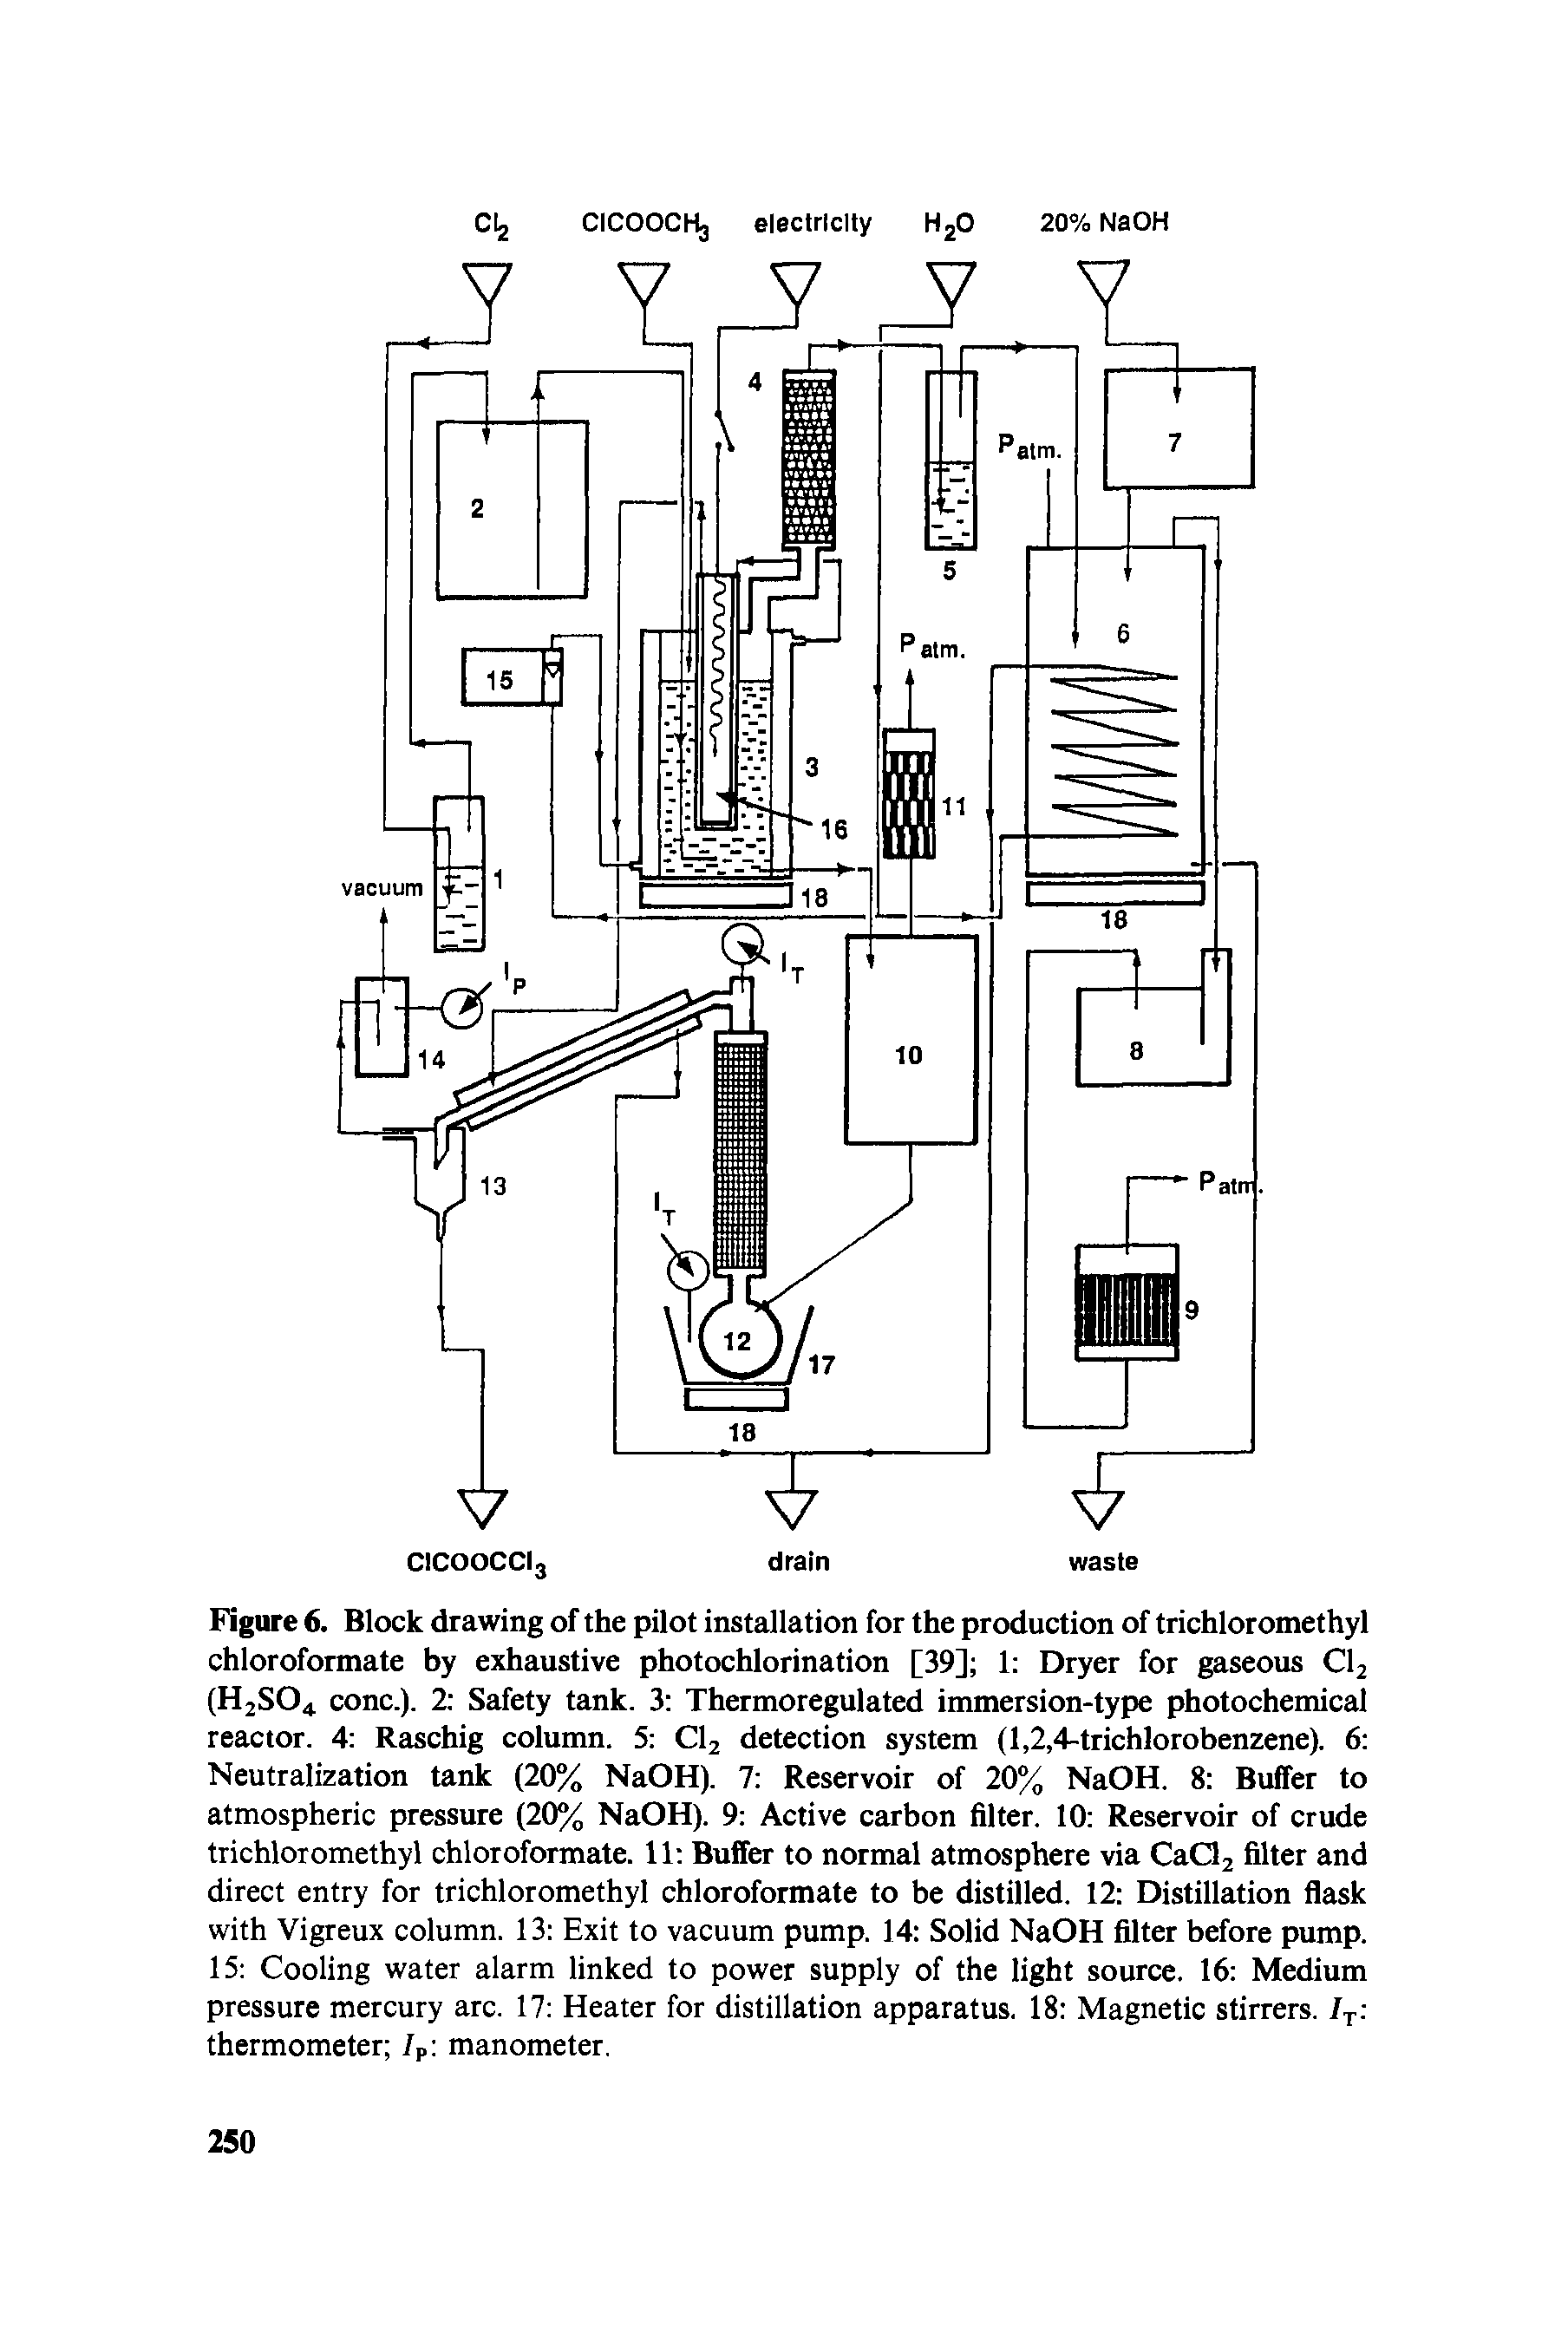 Figure 6. Block drawing of the pilot installation for the production of trichloromethyl chloroformate by exhaustive photochlorination [39] 1 Dryer for gaseous Cl2 (H2S04 cone.). 2 Safety tank. 3 Thermoregulated immersion-type photochemical reactor. 4 Raschig column. 5 Cl2 detection system (1,2,4-trichlorobenzene). 6 Neutralization tank (20% NaOH). 7 Reservoir of 20% NaOH. 8 Buffer to atmospheric pressure (20% NaOH). 9 Active carbon filter. 10 Reservoir of crude trichloromethyl chloroformate. 11 Buffer to normal atmosphere via CaCl2 filter and direct entry for trichloromethyl chloroformate to be distilled. 12 Distillation flask with Vigreux column. 13 Exit to vacuum pump. 14 Solid NaOH filter before pump. 15 Cooling water alarm linked to power supply of the light source. 16 Medium pressure mercury arc. 17 Heater for distillation apparatus. 18 Magnetic stirrers. /T thermometer /P manometer.